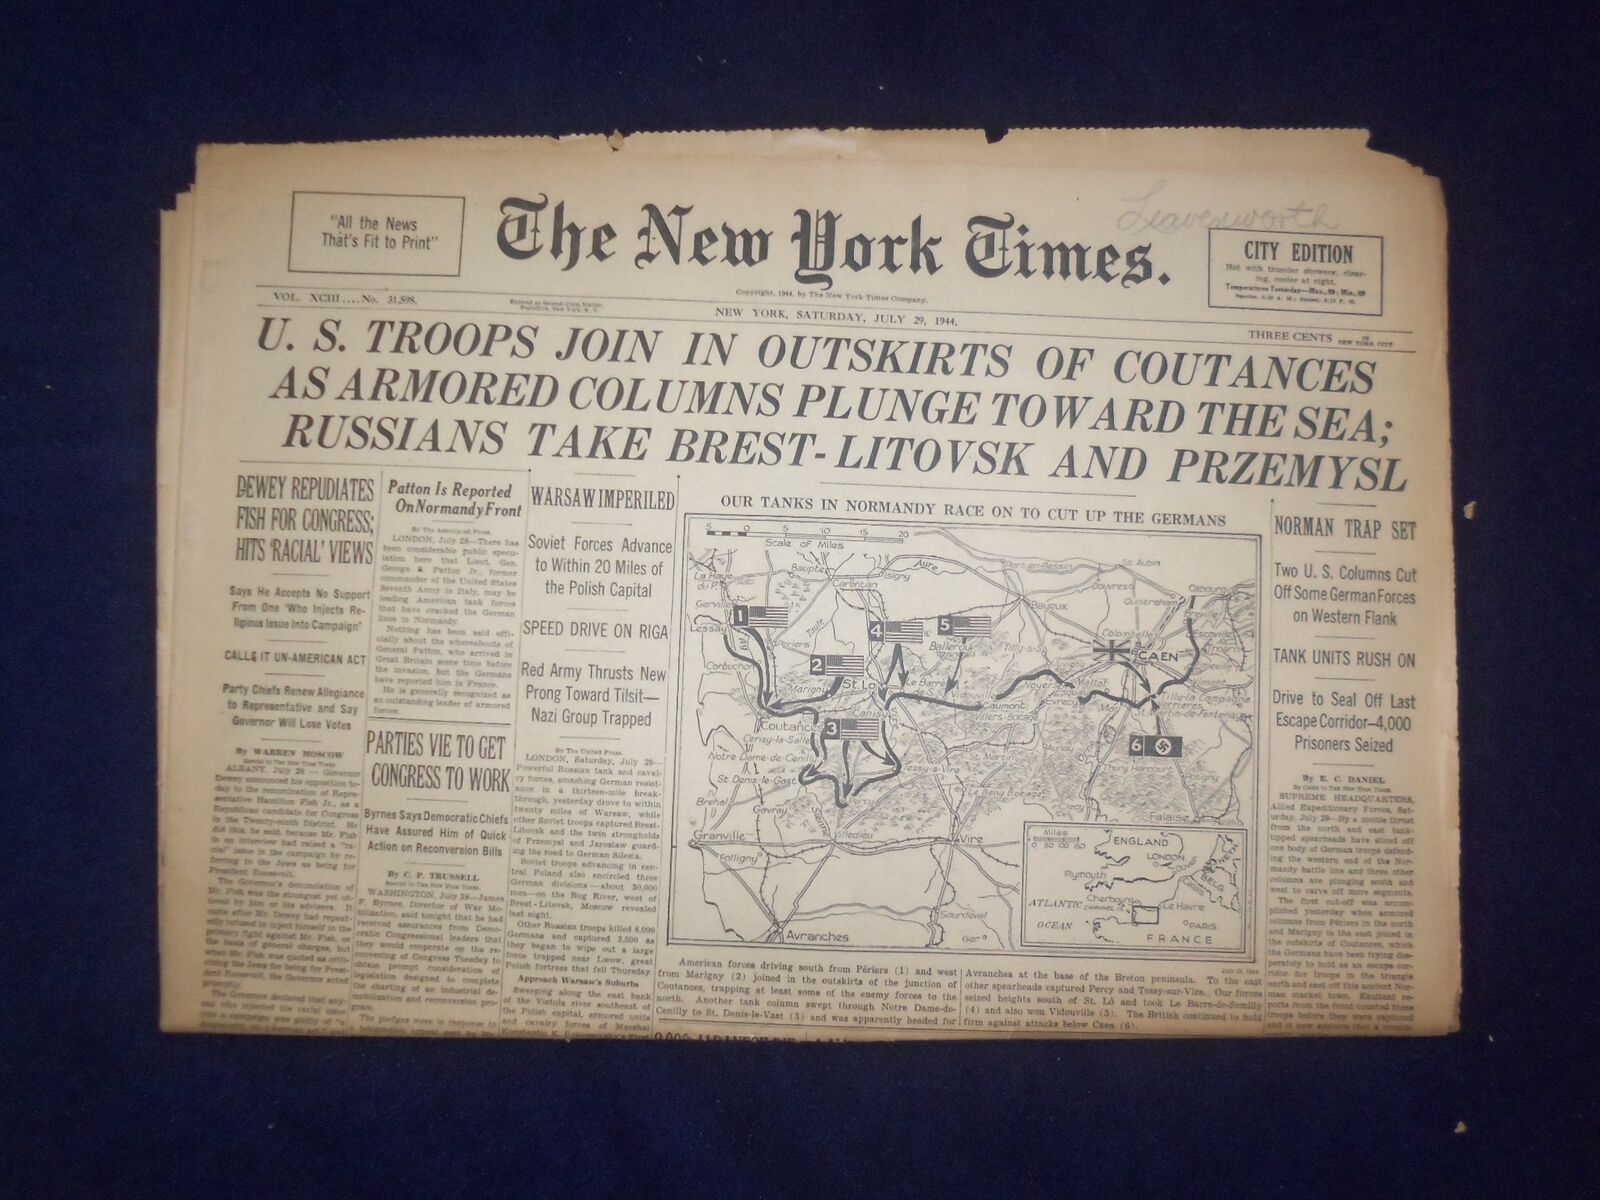 1944 JULY 29 NEW YORK TIMES - U.S TROOPS JOIN IN OUTSKIRTS OF COUTANCES- NP 6597